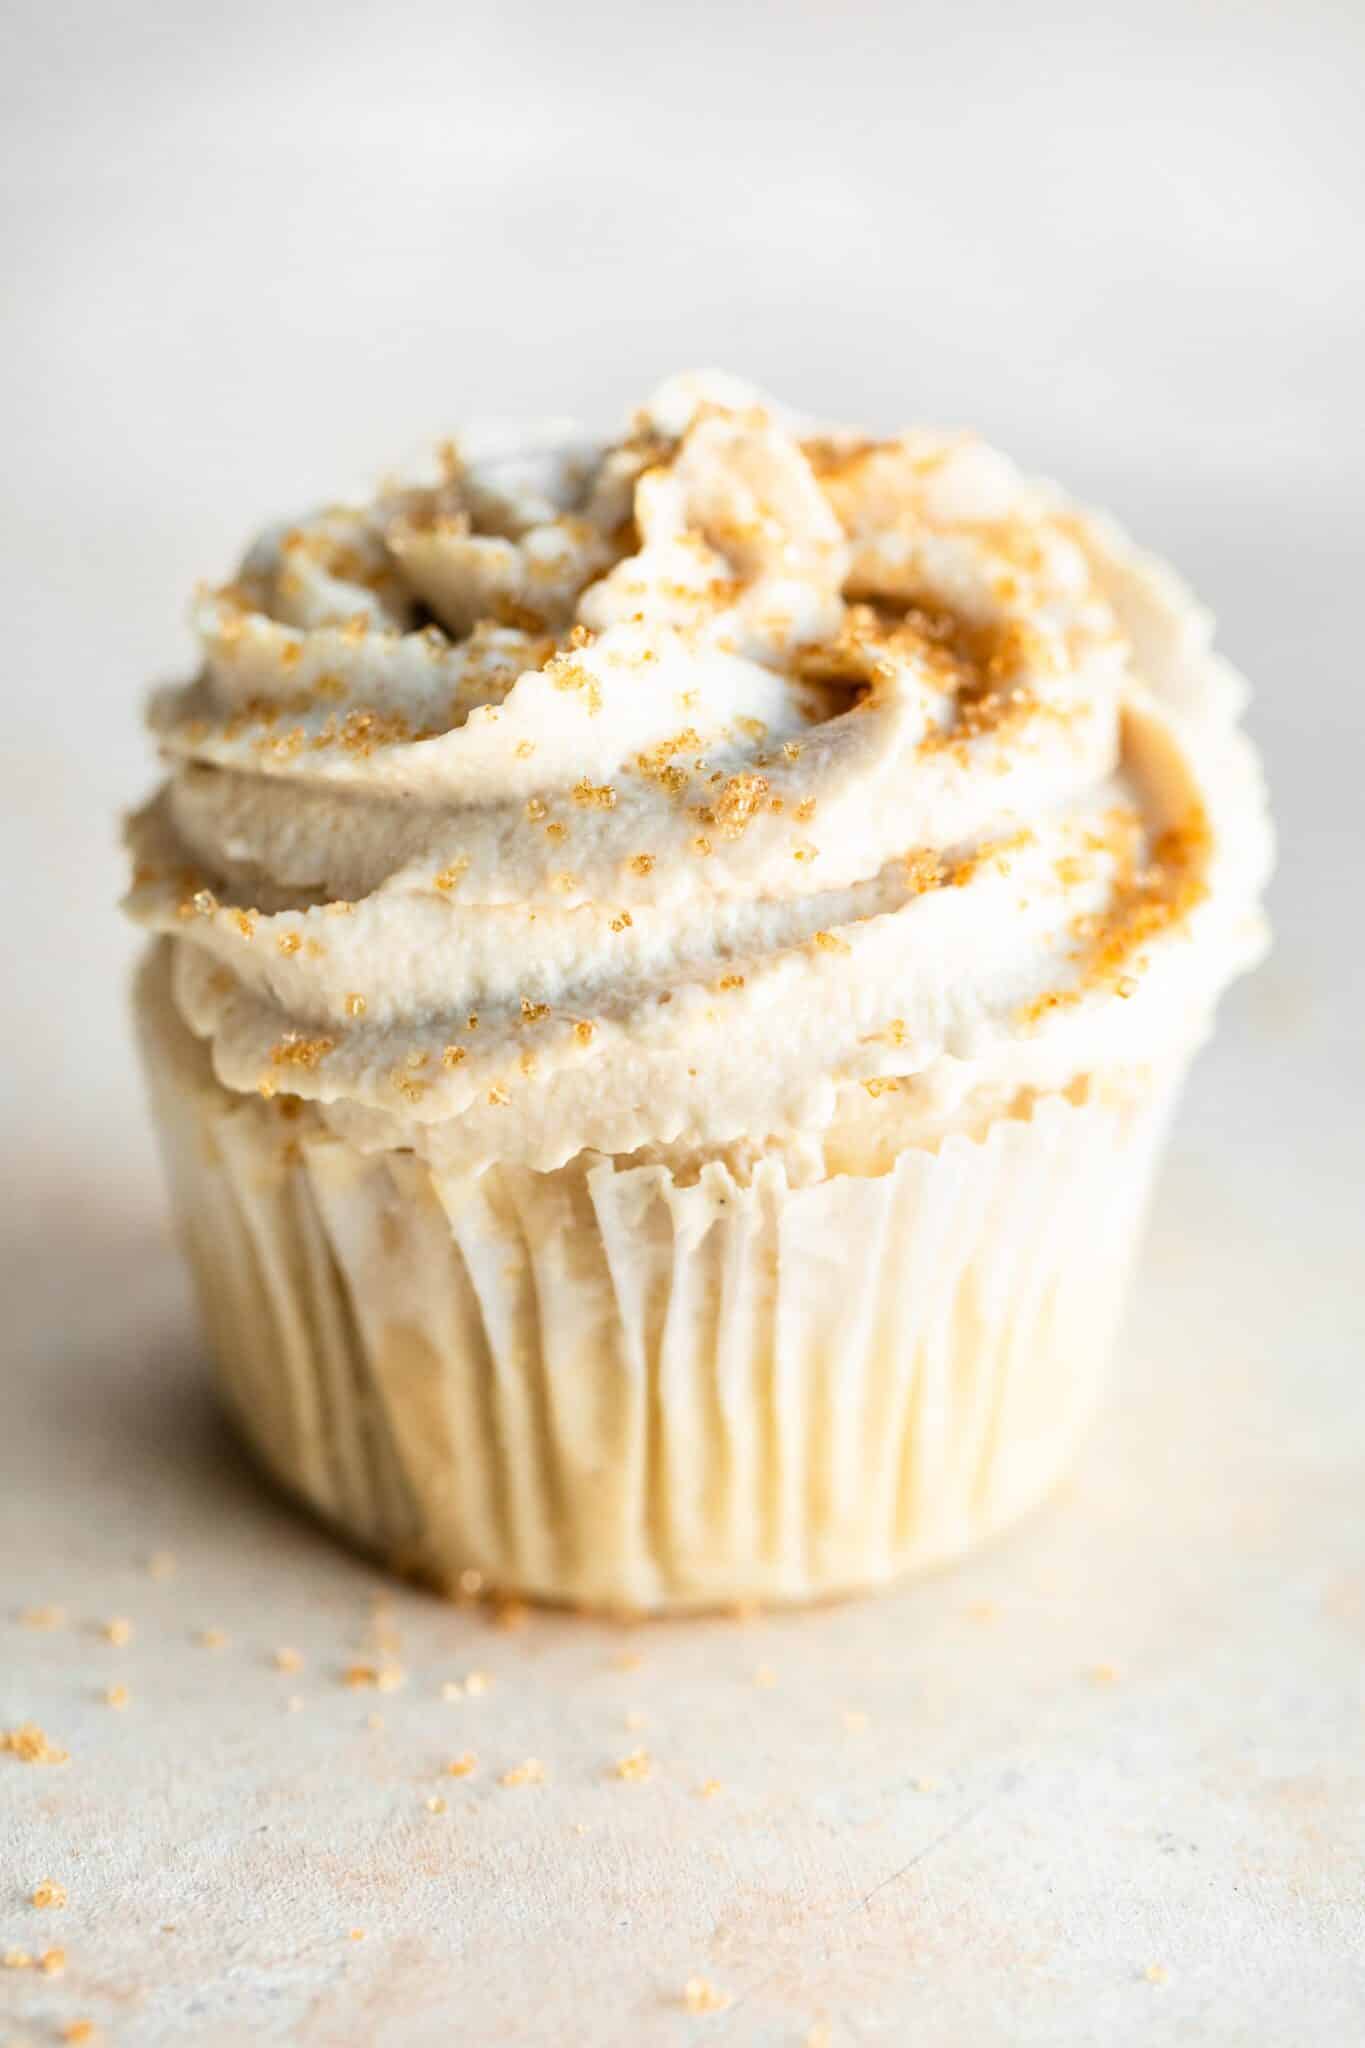 Up close photo of a gluten free vanilla cupcake frosted with cashew frosting.